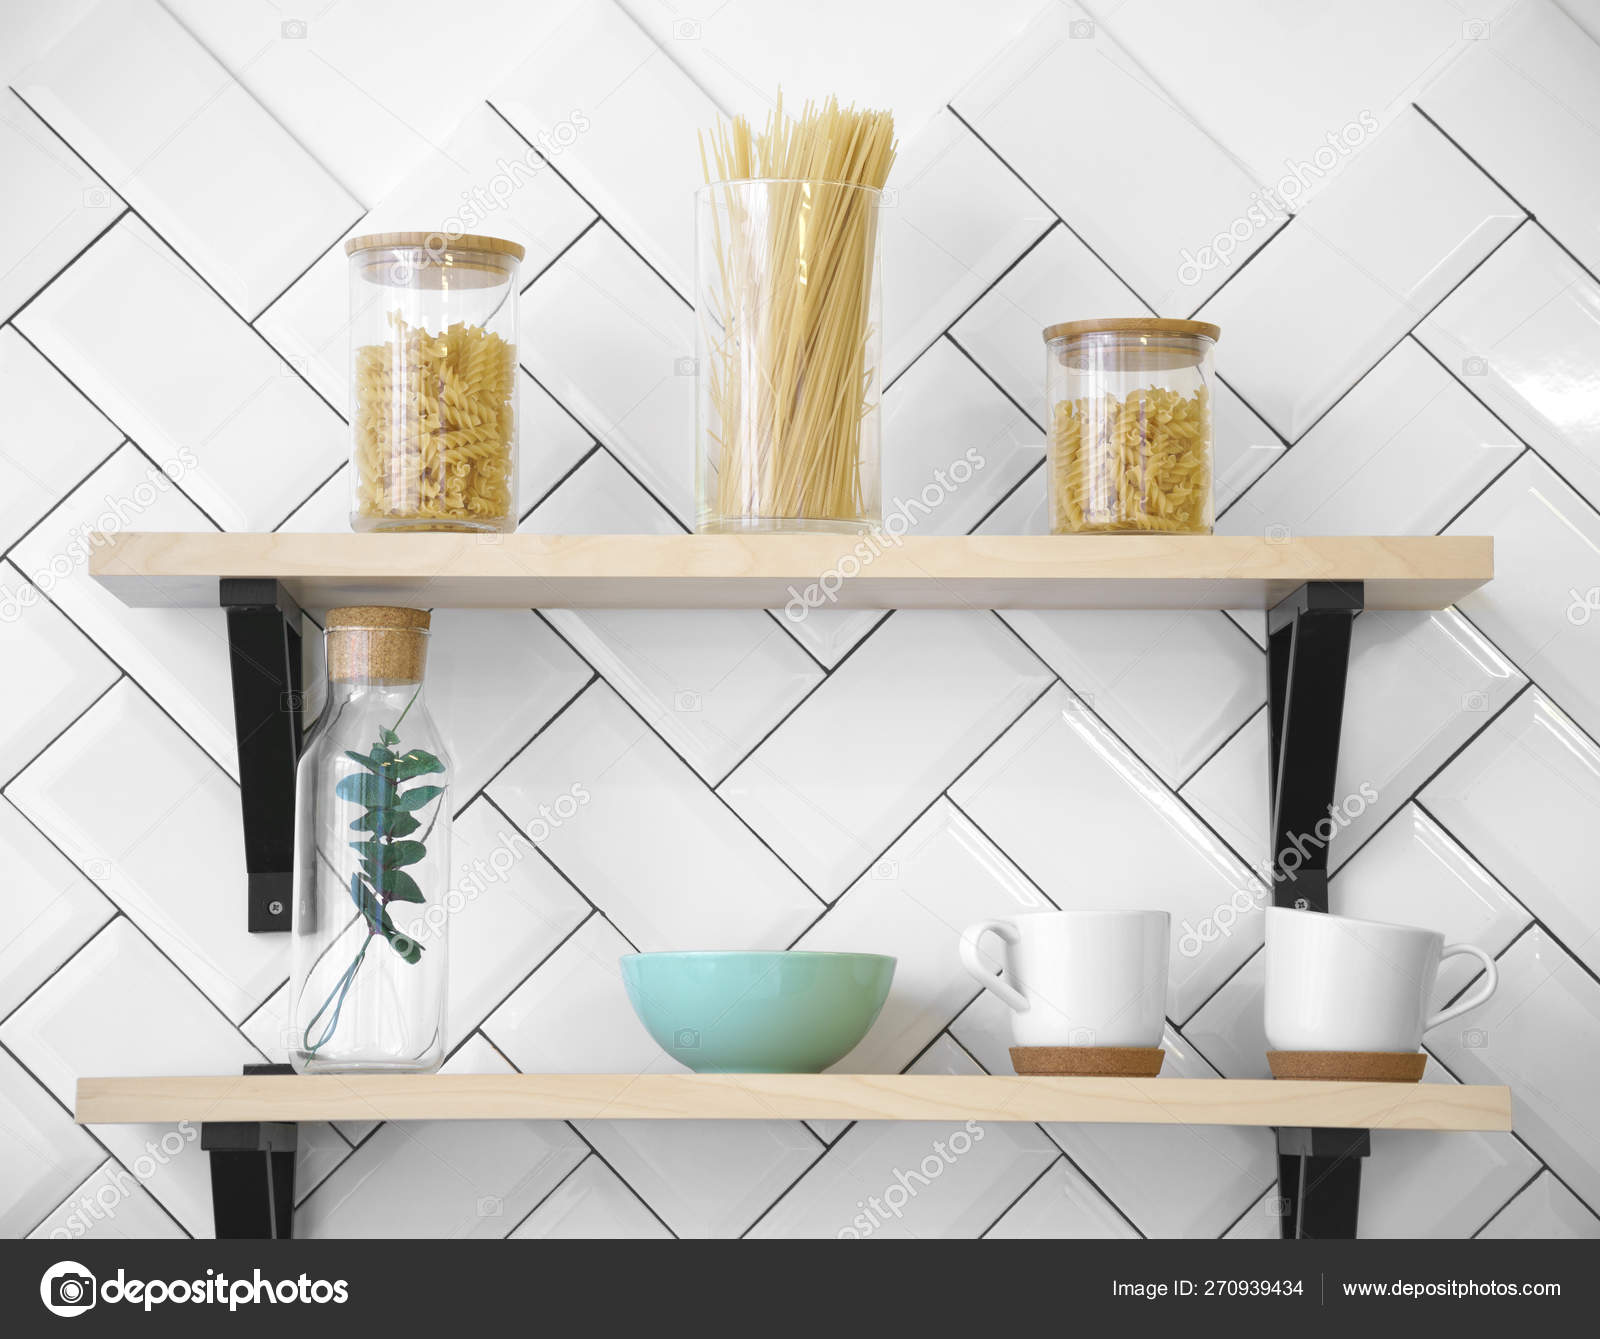 Wooden Kitchen Shelves With Cups And, Wooden Kitchen Shelves